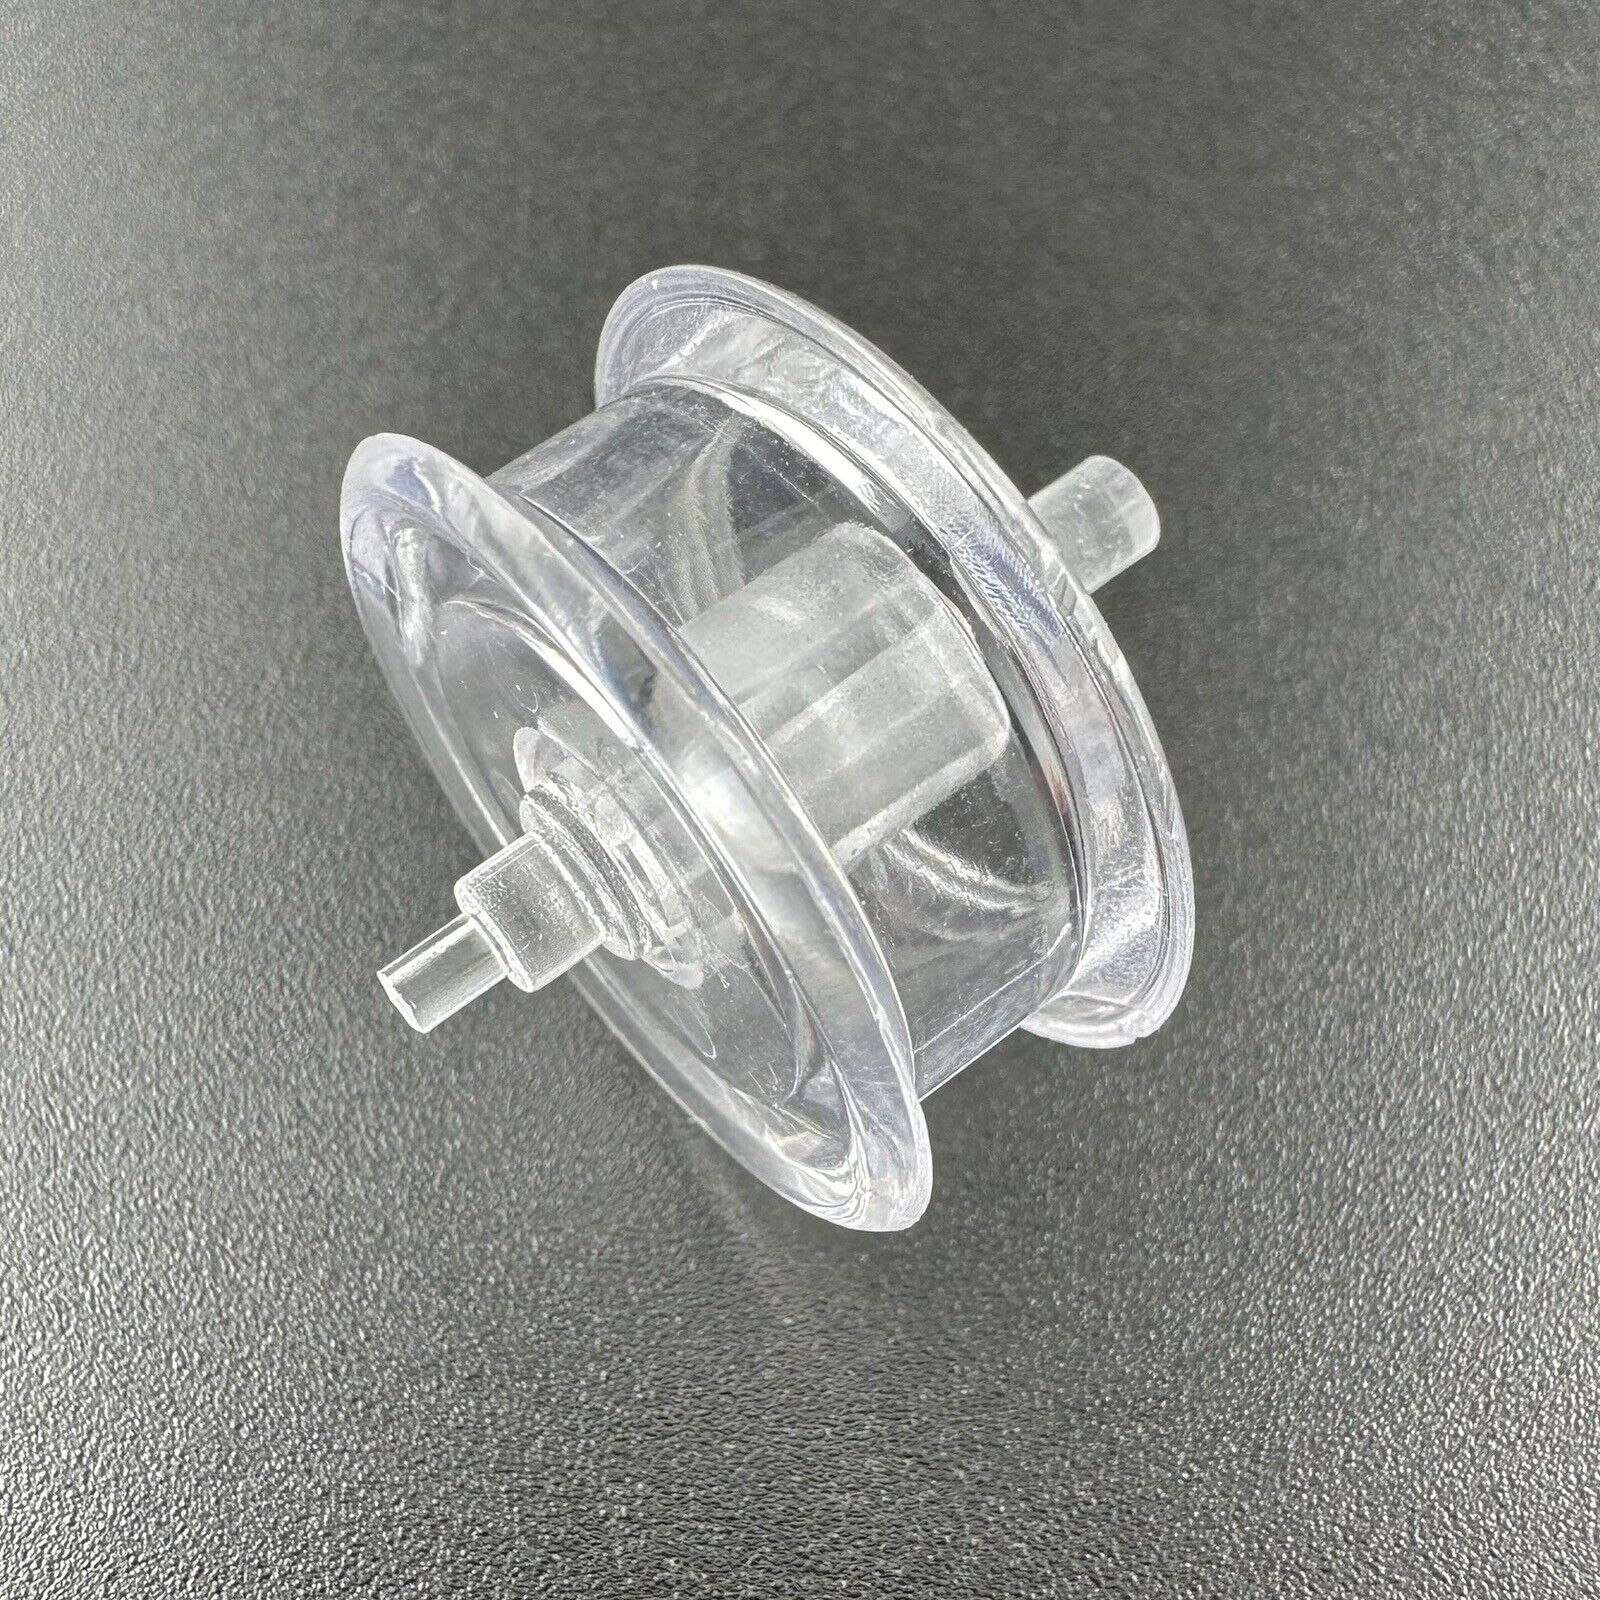 Finalmouse Air58 / Ultralight Phantom Replacement Scroll Wheel Clear